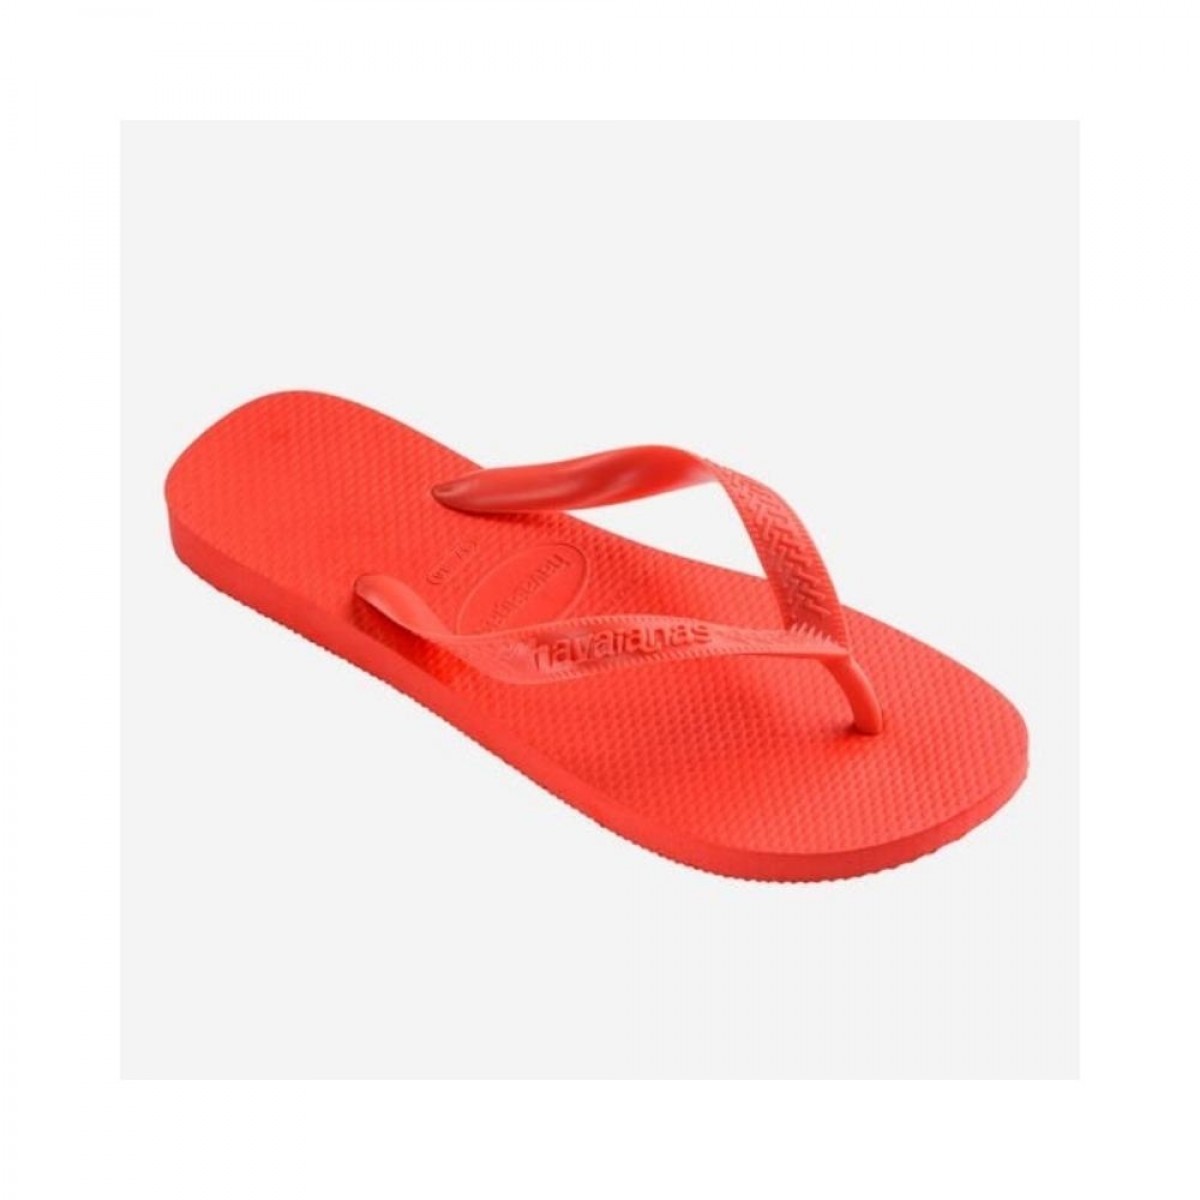 havaianas top - red crush - fra toppen